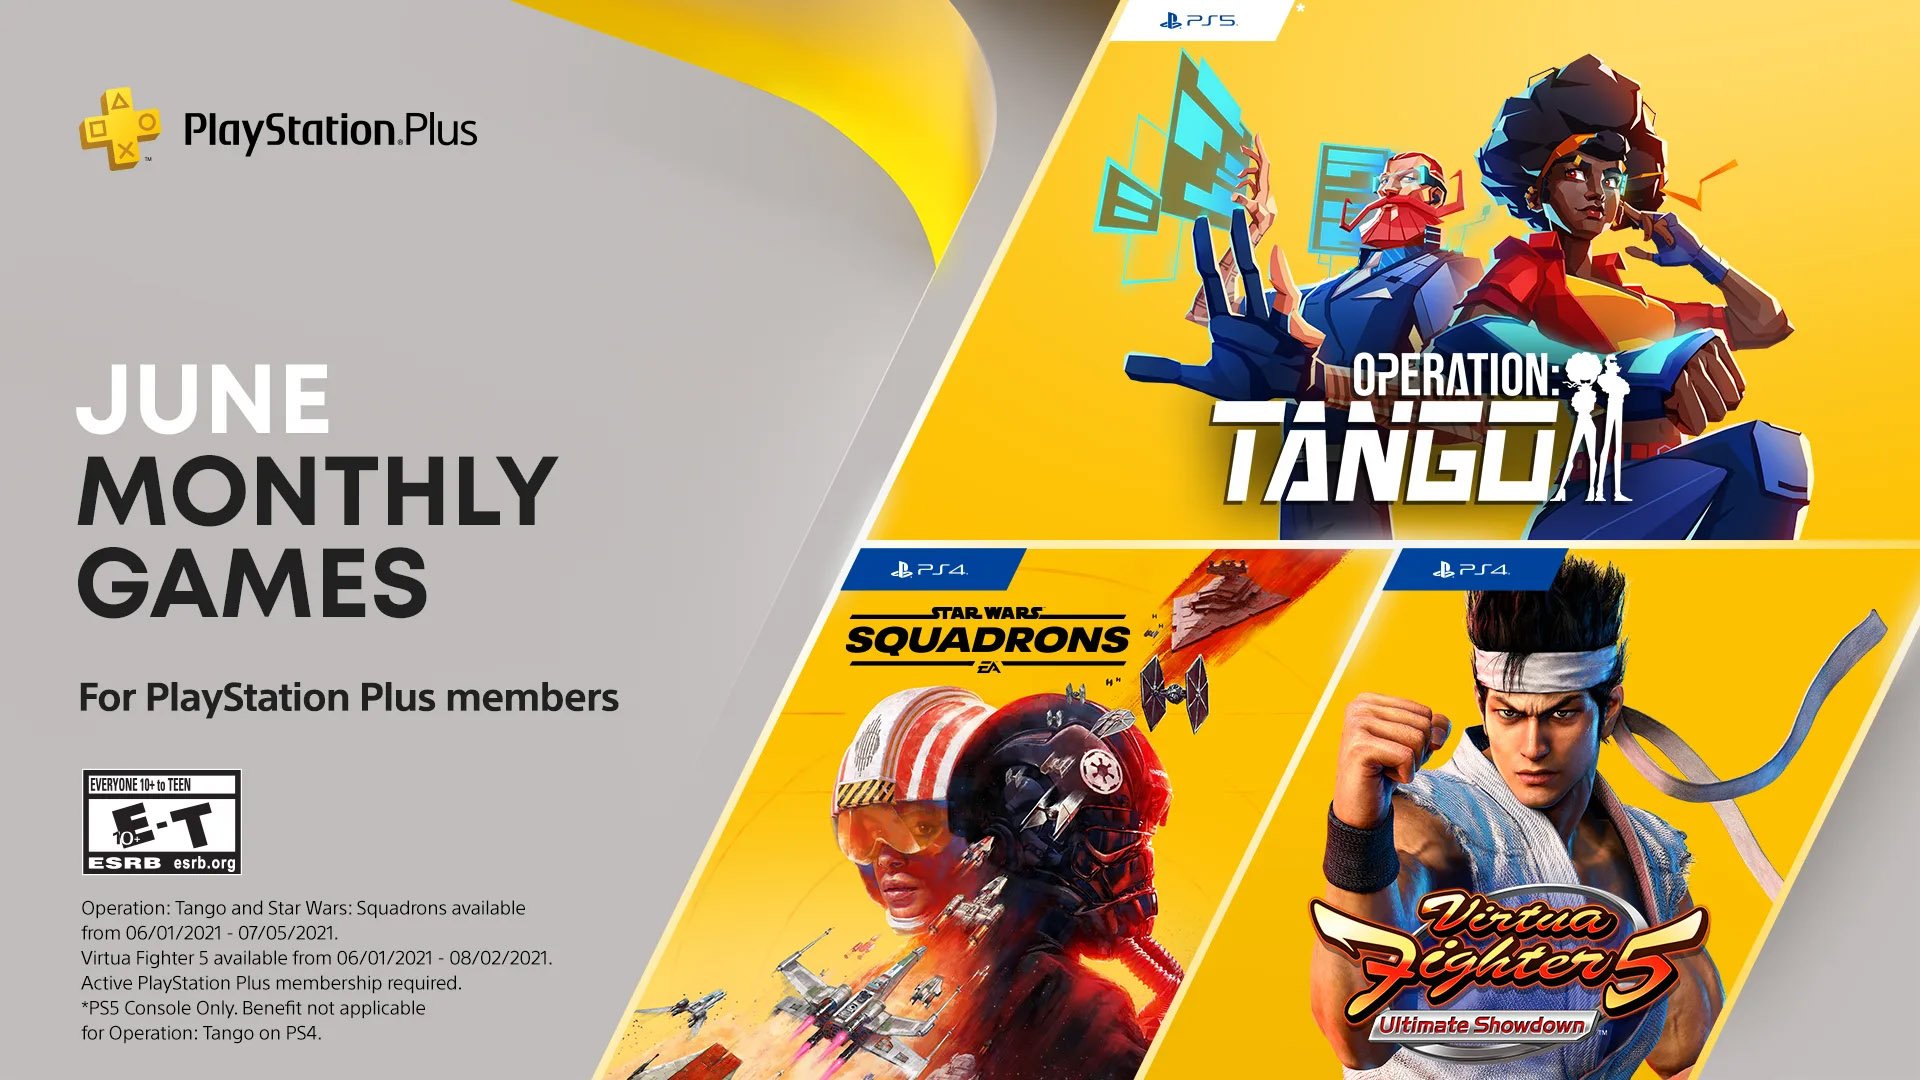 PlayStation Plus: Free Games for May 2016 – PlayStation.Blog